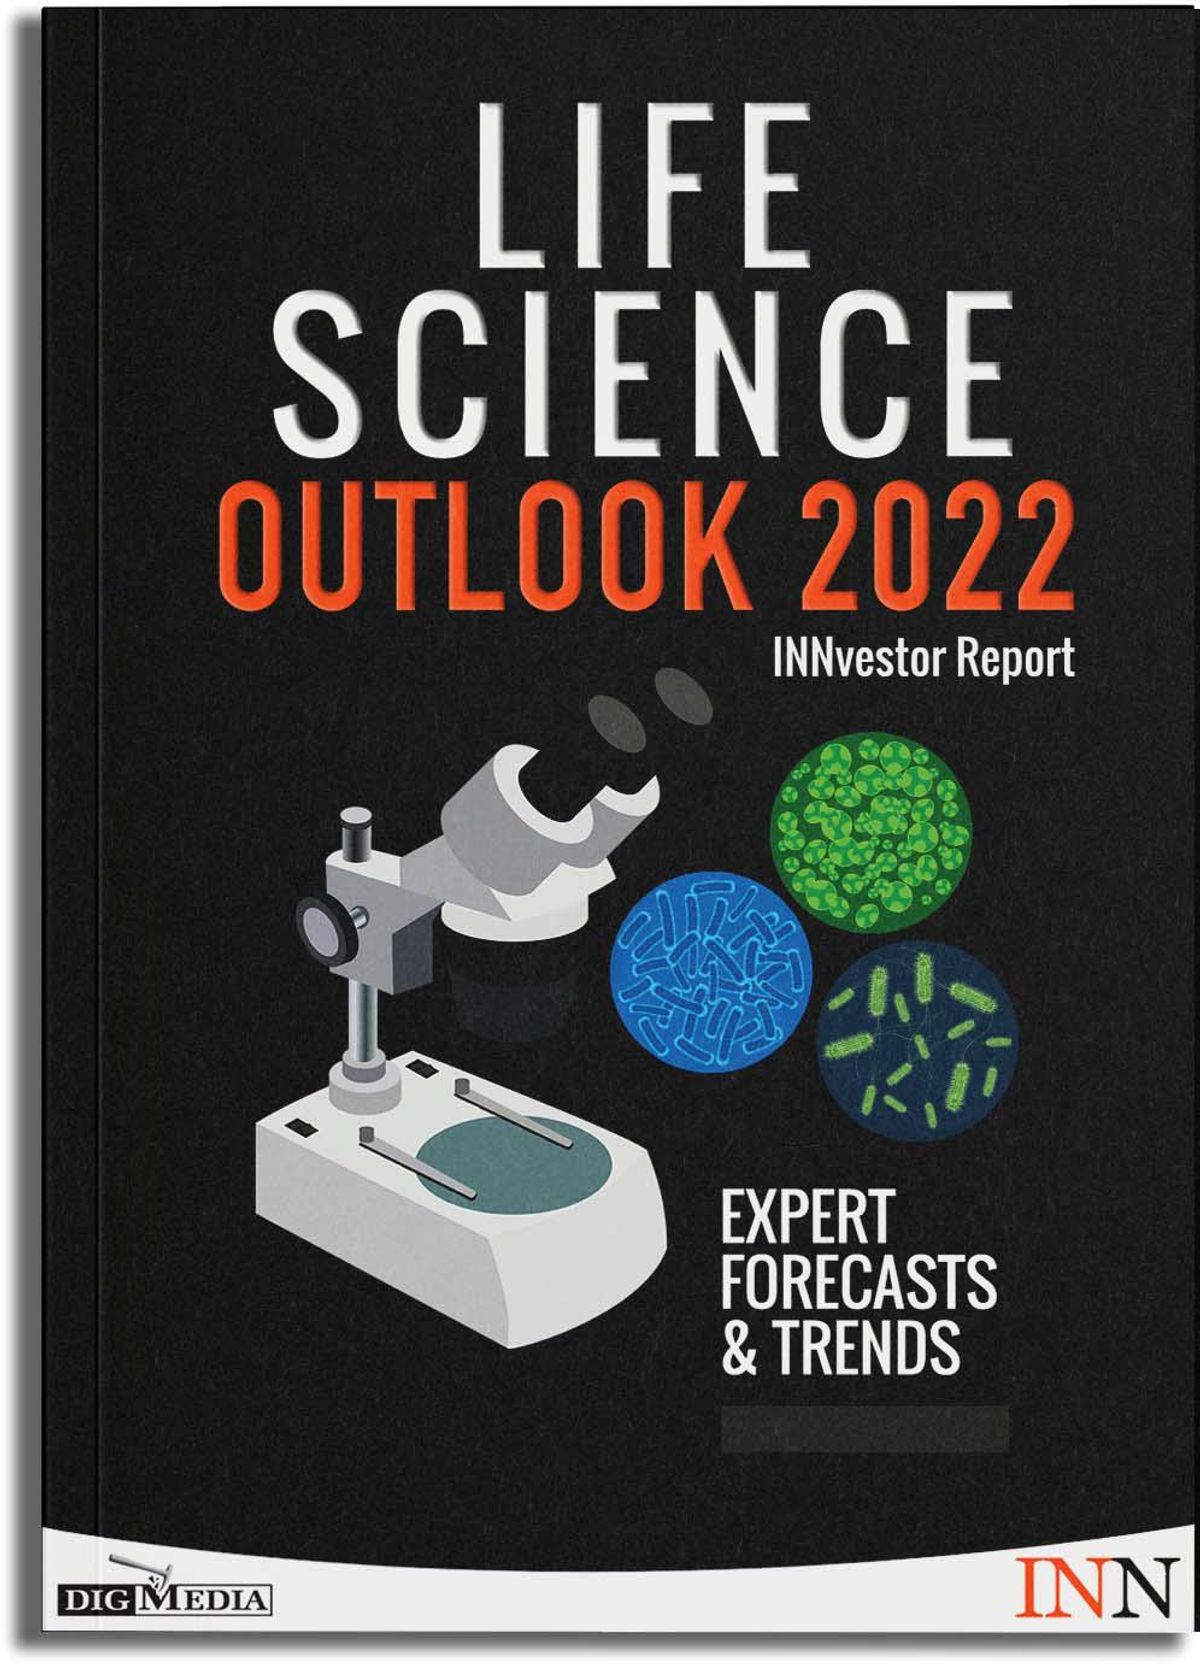 NEW! Download Your 2022 Life Science Outlook Report.